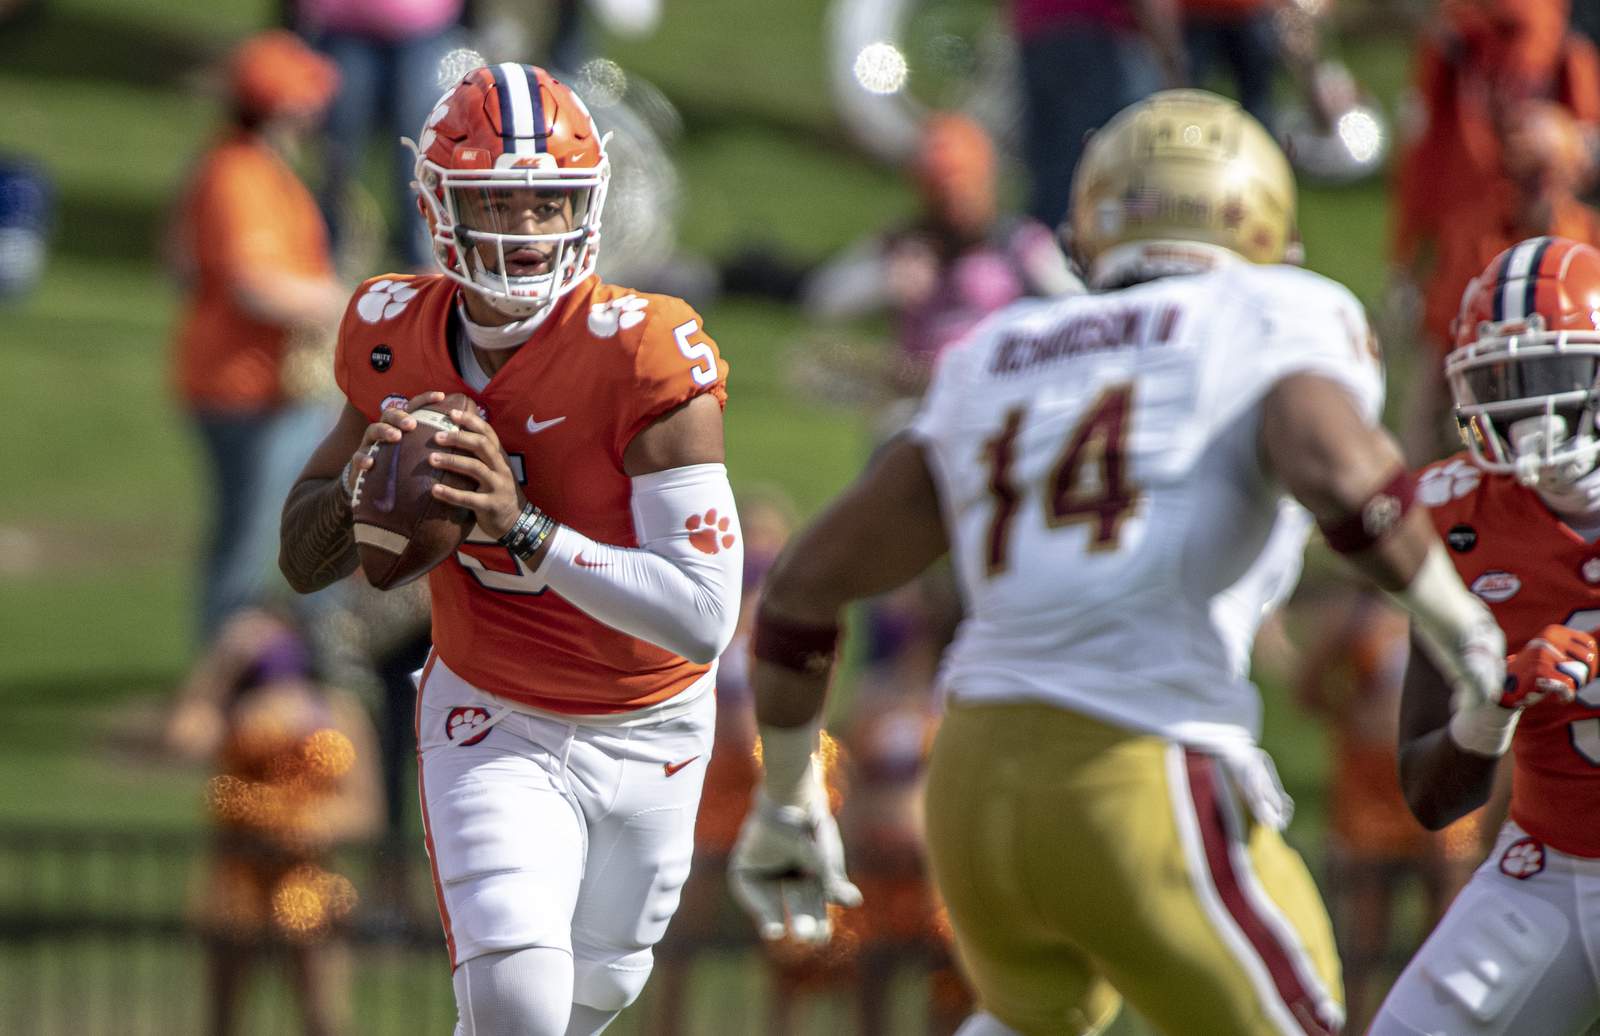 QB Uiagalelei rallies No. 1 Clemson to 34-28 win over BC